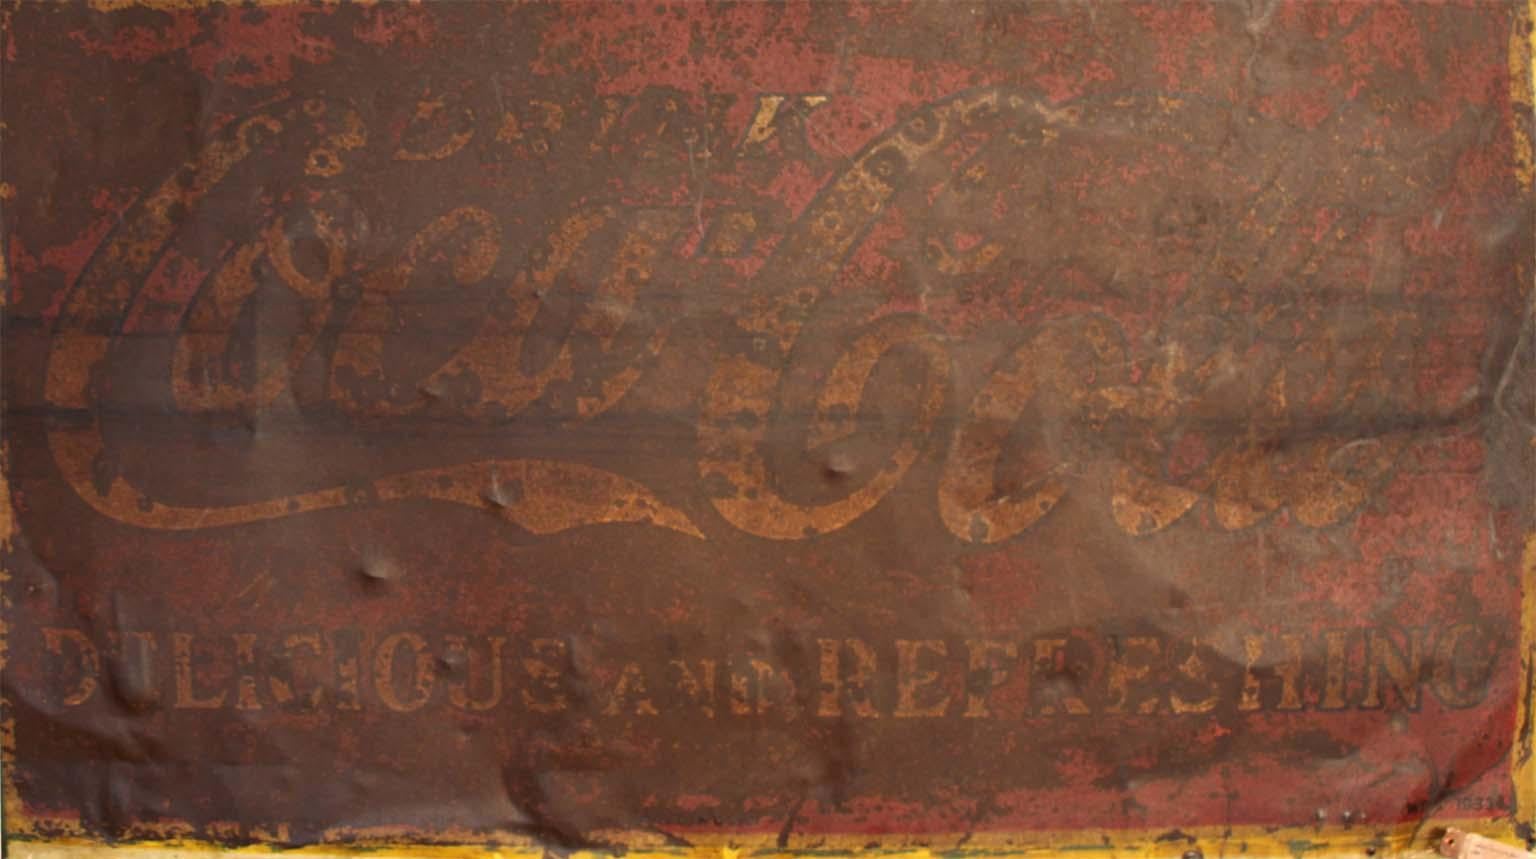 This is an amazing antique metal sign, framed with an image of a Coca Cola bottle. The words Cigars, Tobacco and Candy across the top in faded green paint. The sign is in original condition showing the texture and age of an old metal sign dated